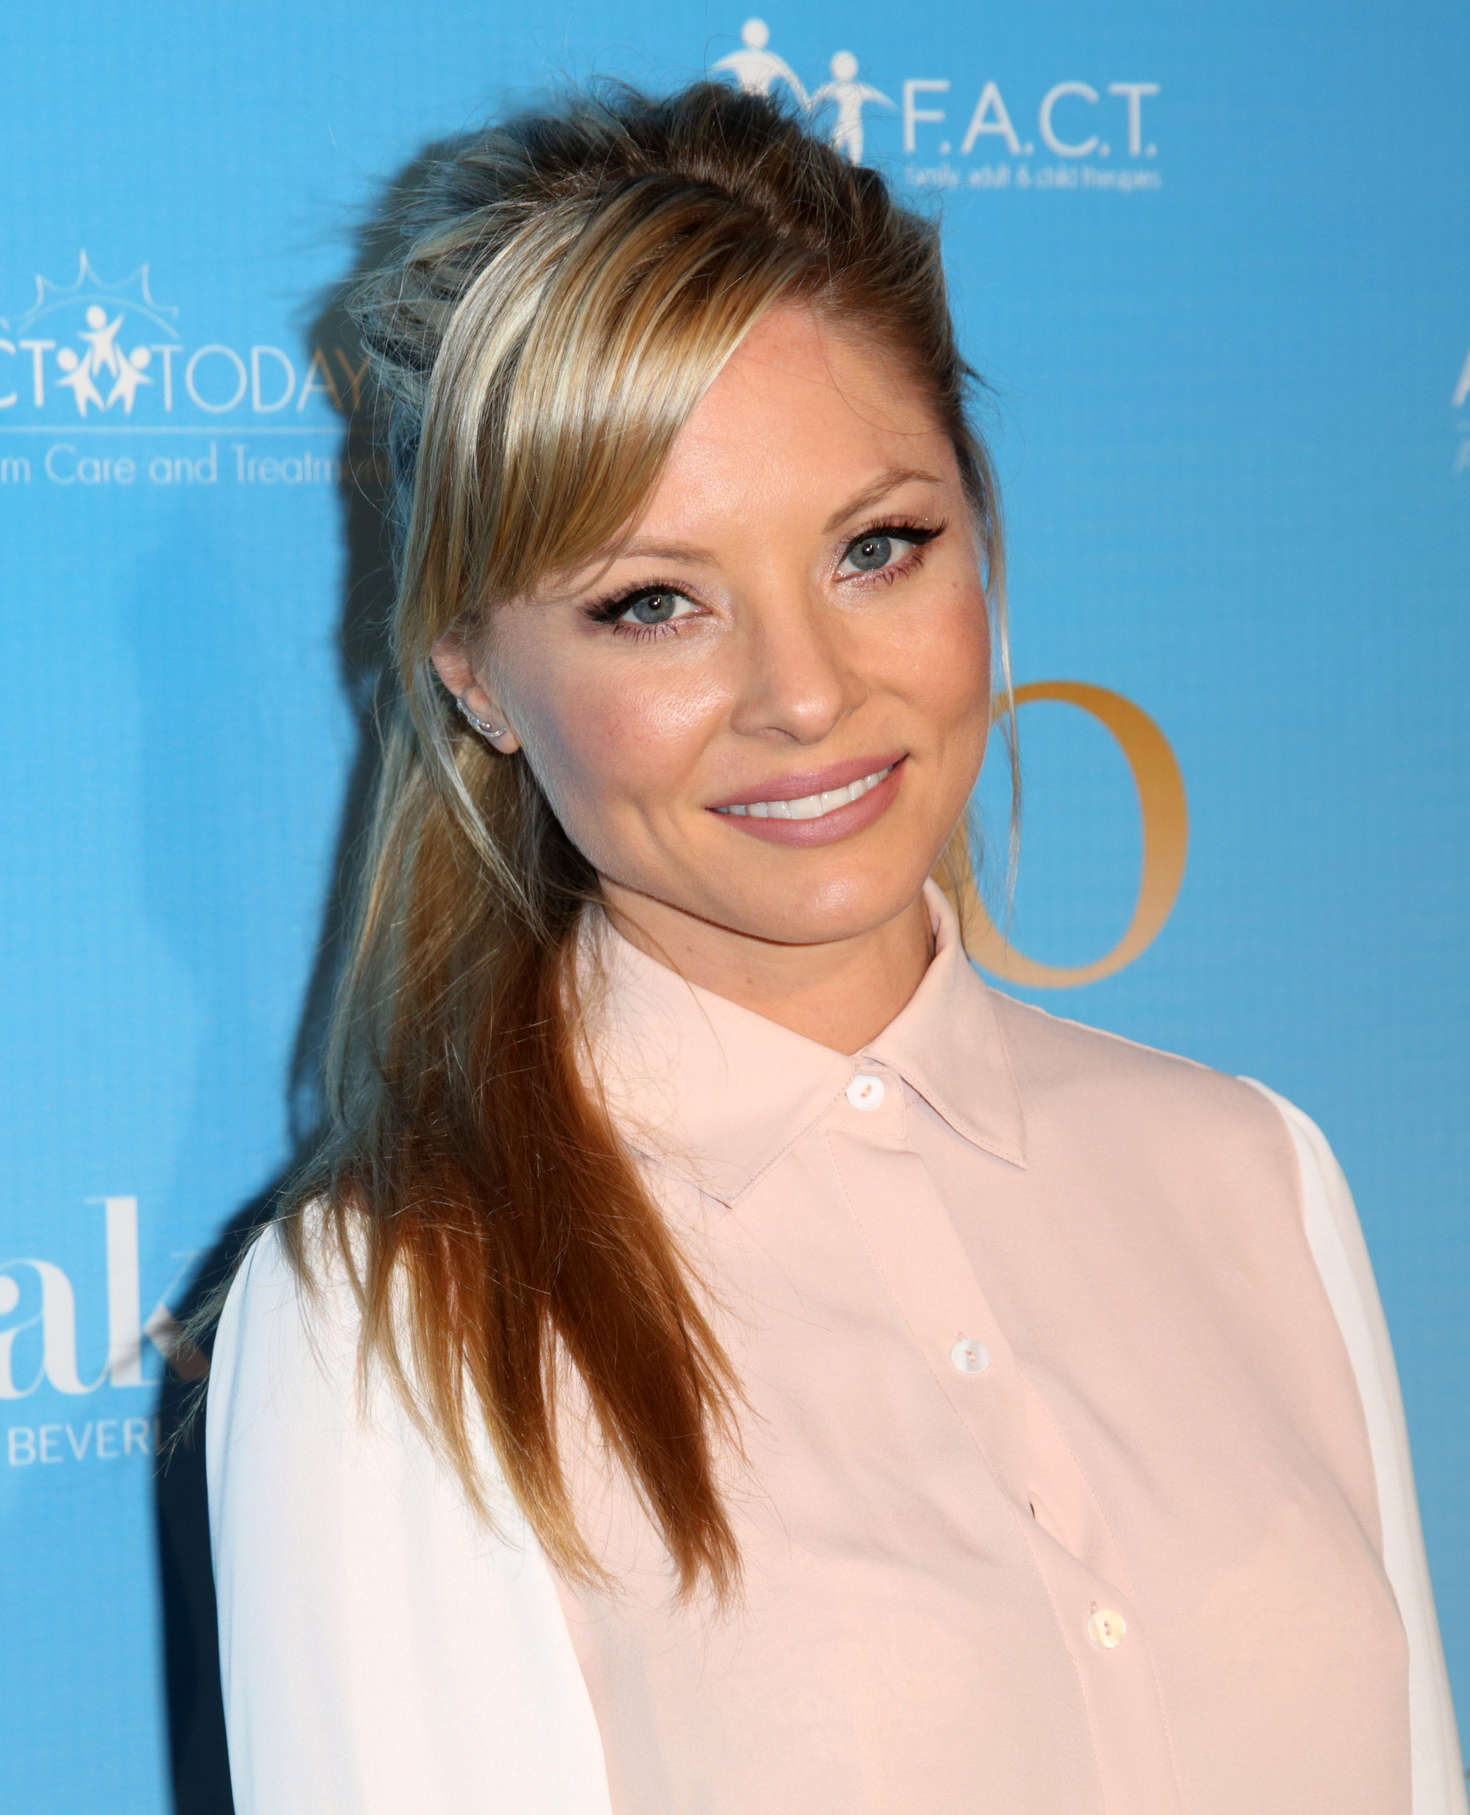 Kaitlin Doubleday An Autism Awareness Screening of the feature film Po in Los Angeles